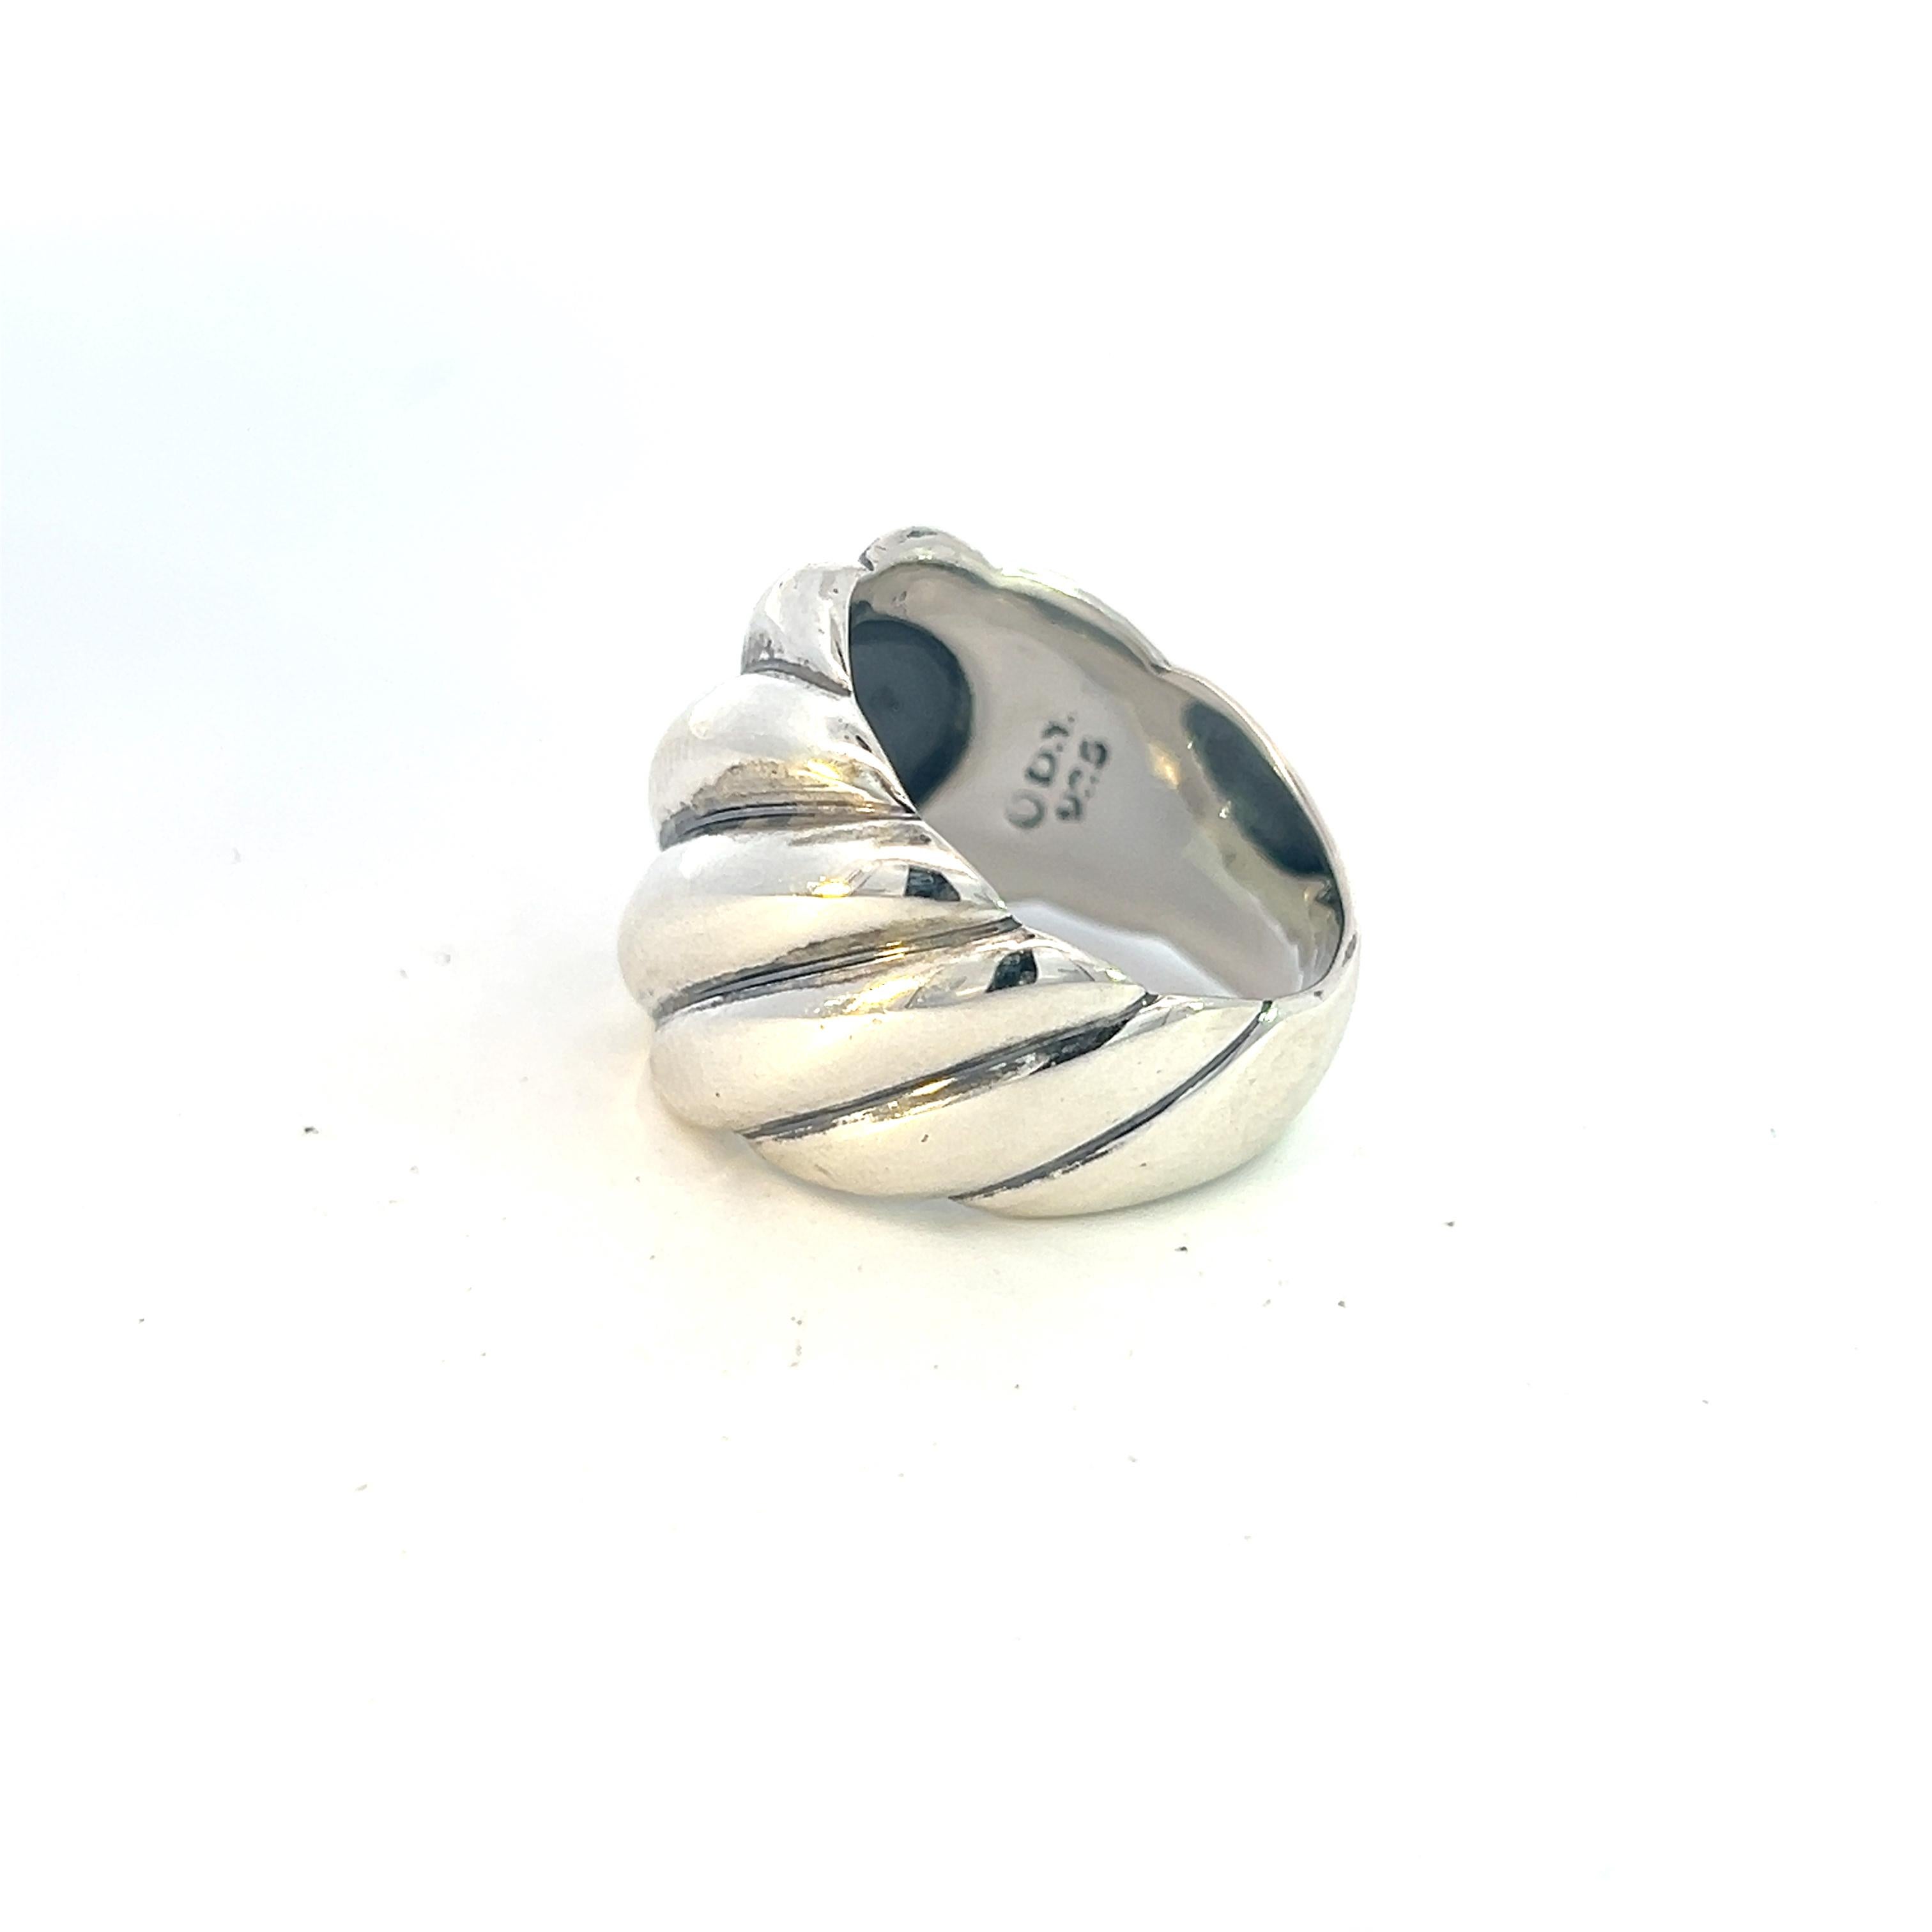 Authentic David Yurman Estate Cable Dome Ring Size 7.75 18 mm height Silver DY424

Retail: $999.00

This elegant Authentic David Yurman ring is made of sterling silver.

TRUSTED SELLER SINCE 2002

PLEASE SEE OUR HUNDREDS OF POSITIVE FEEDBACKS FROM